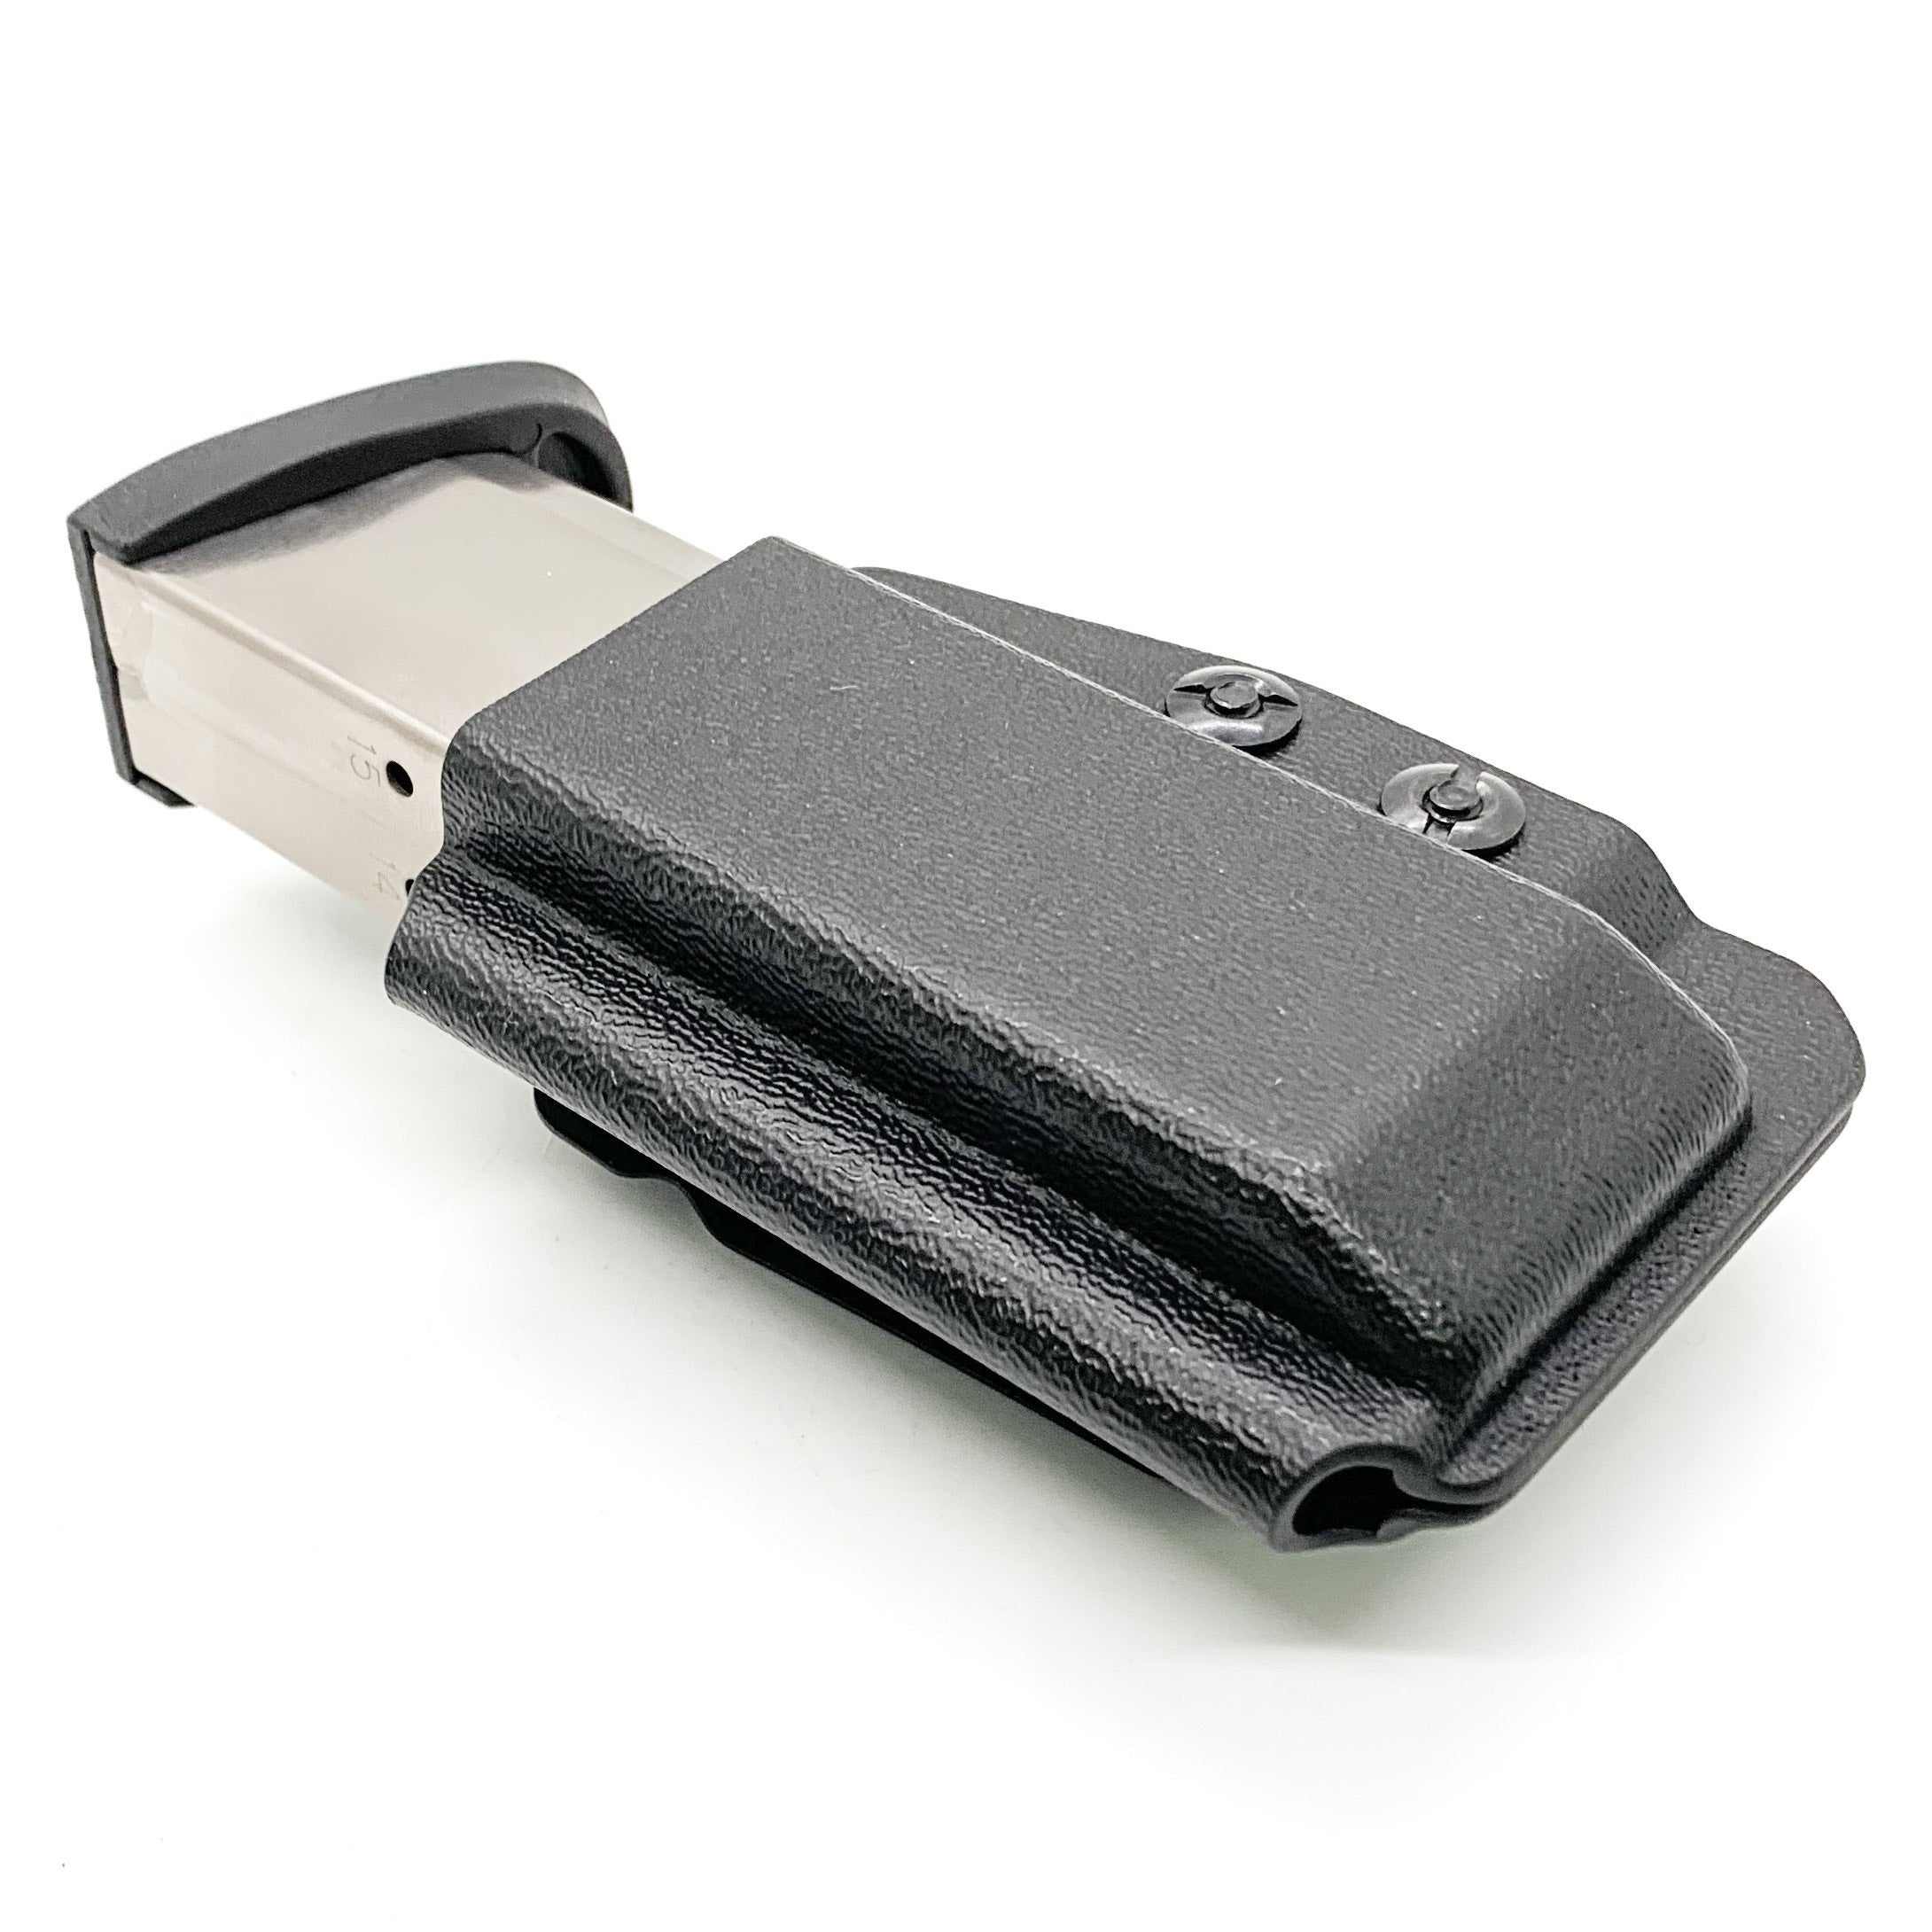 For the Best Kydex IWB AIWB appendix inside waistband magazine pouch carrier or holster for the Smith & Wesson M&P 2.0 10mm, shop Four Brothers Holsters. Suitable for belt widths of 1 1/2" & 1 3/4". Adjustable retention. Appendix Carry IWB Carrier Holster 